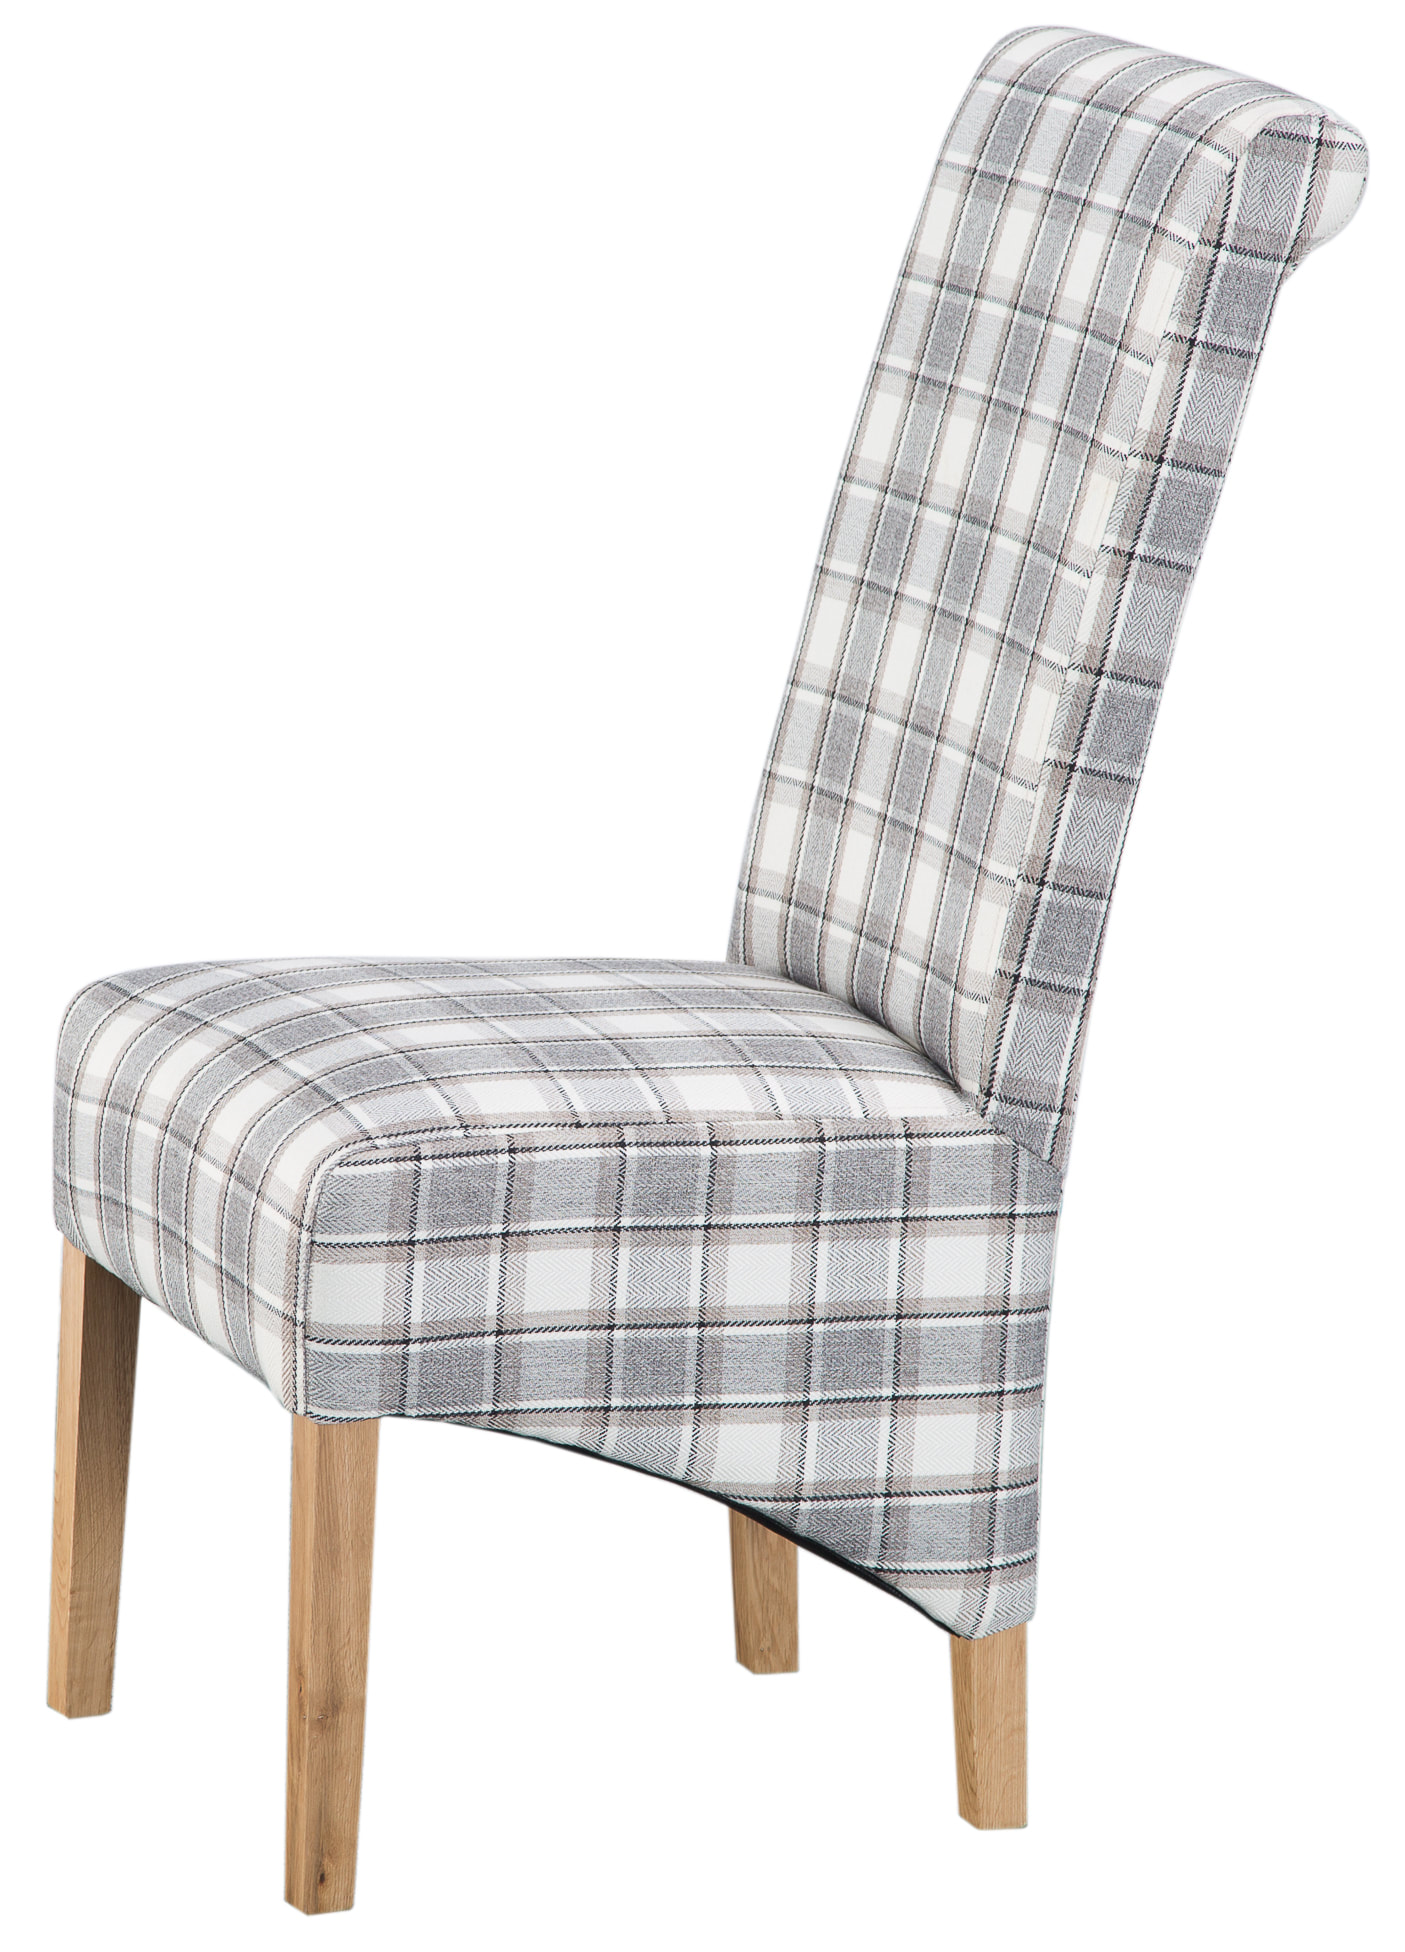 Back Upholstered Dining Chair, Tartan Dining Chairs Next